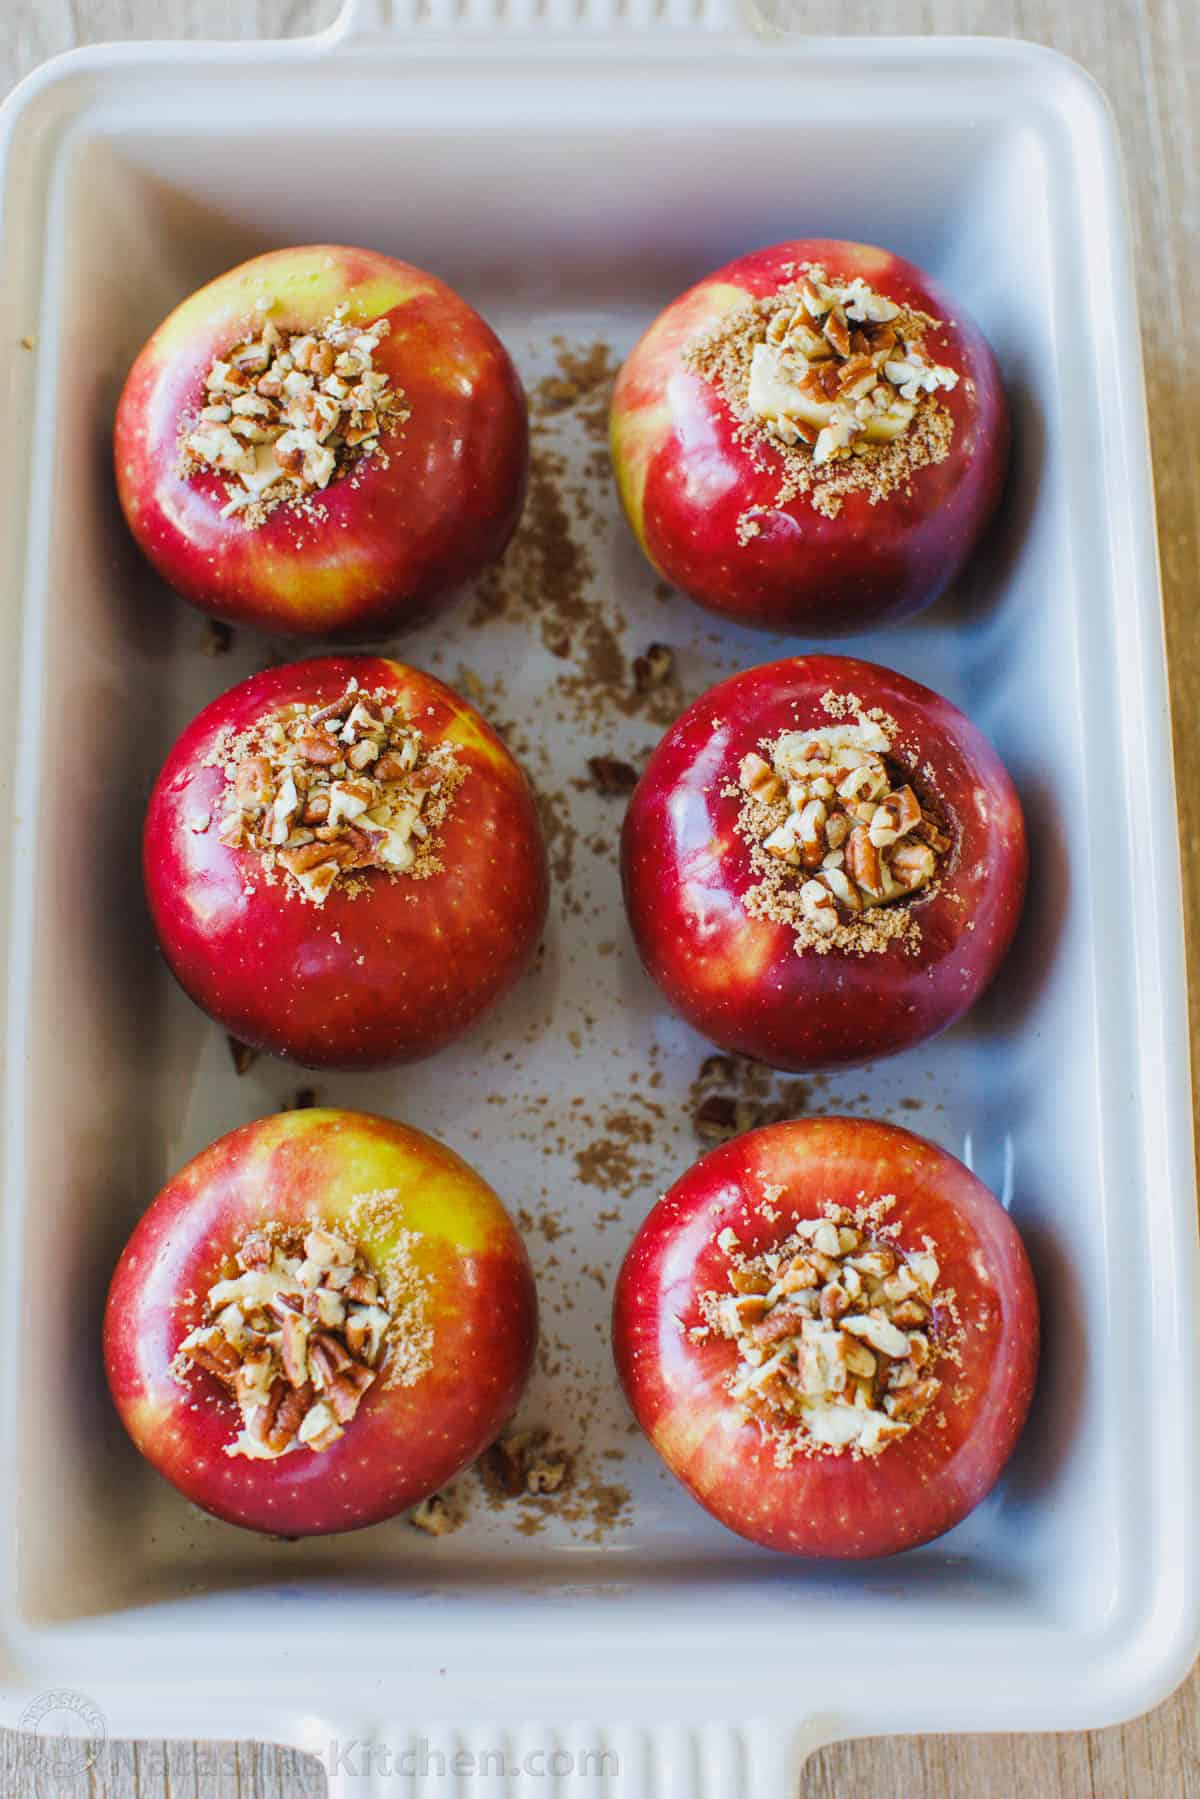 Unbaked apples stuffed with cinnamon sugar filling arranged in a baking dish.